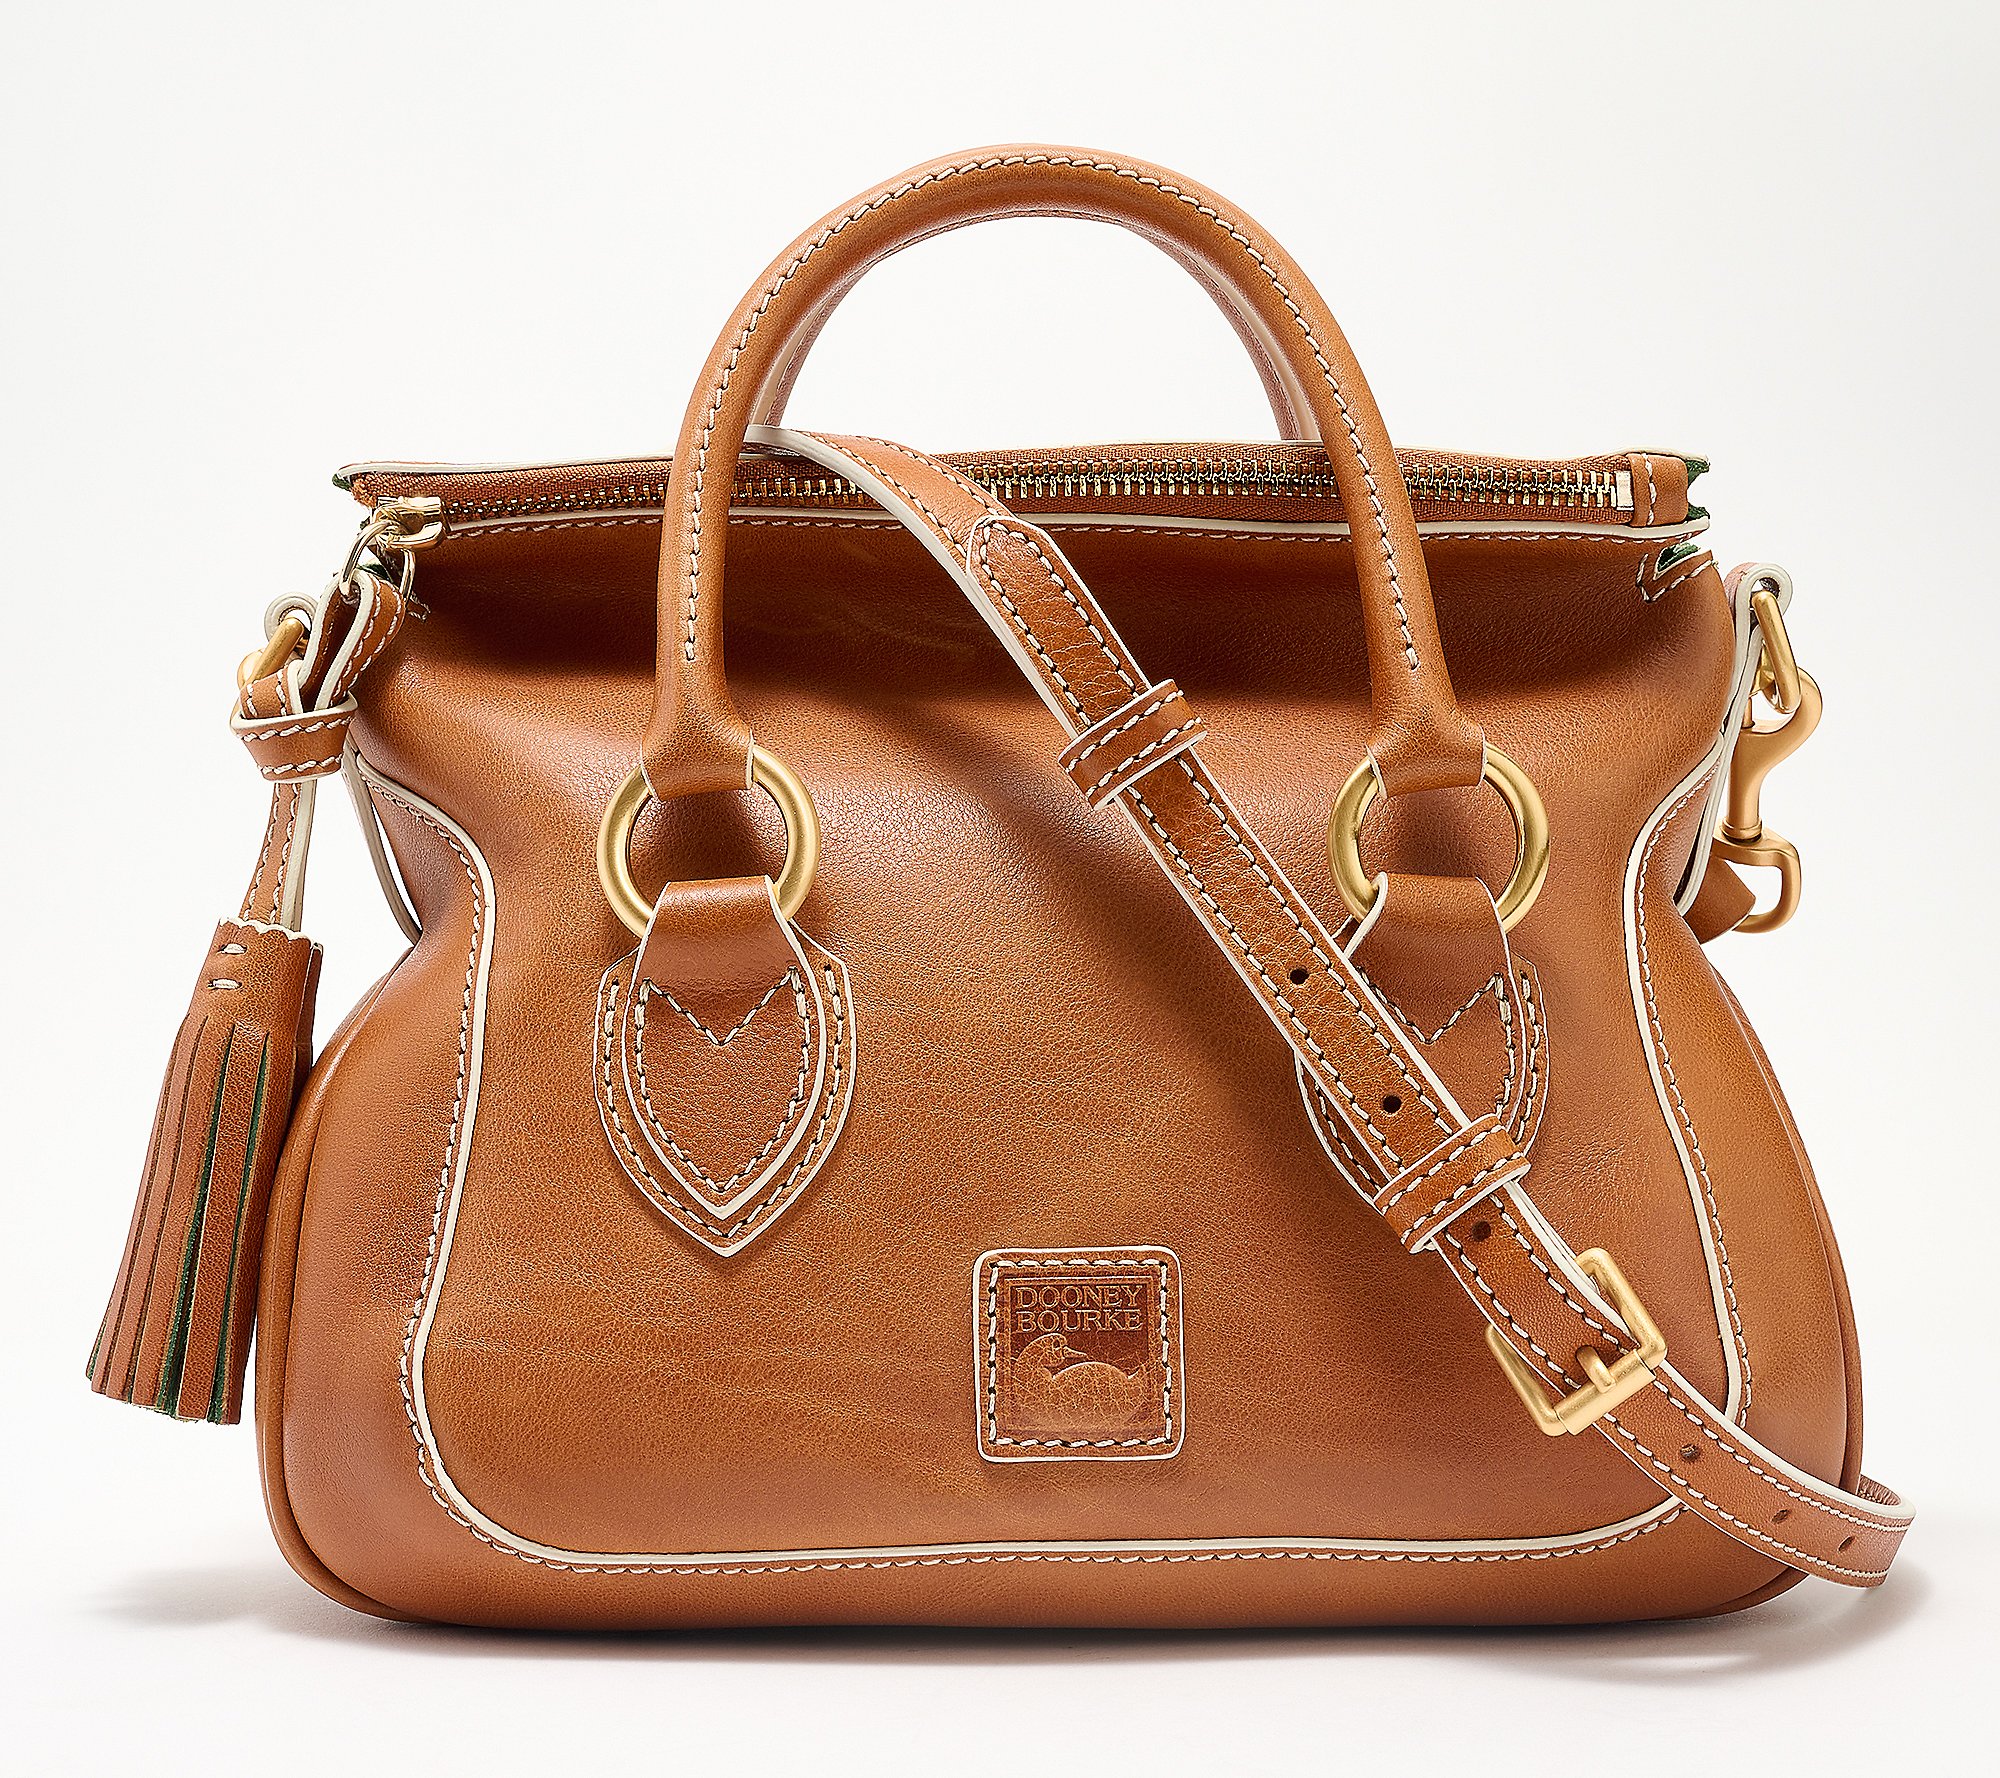 Dooney & Bourke Florentine Leather Letter Carrier on QVC 